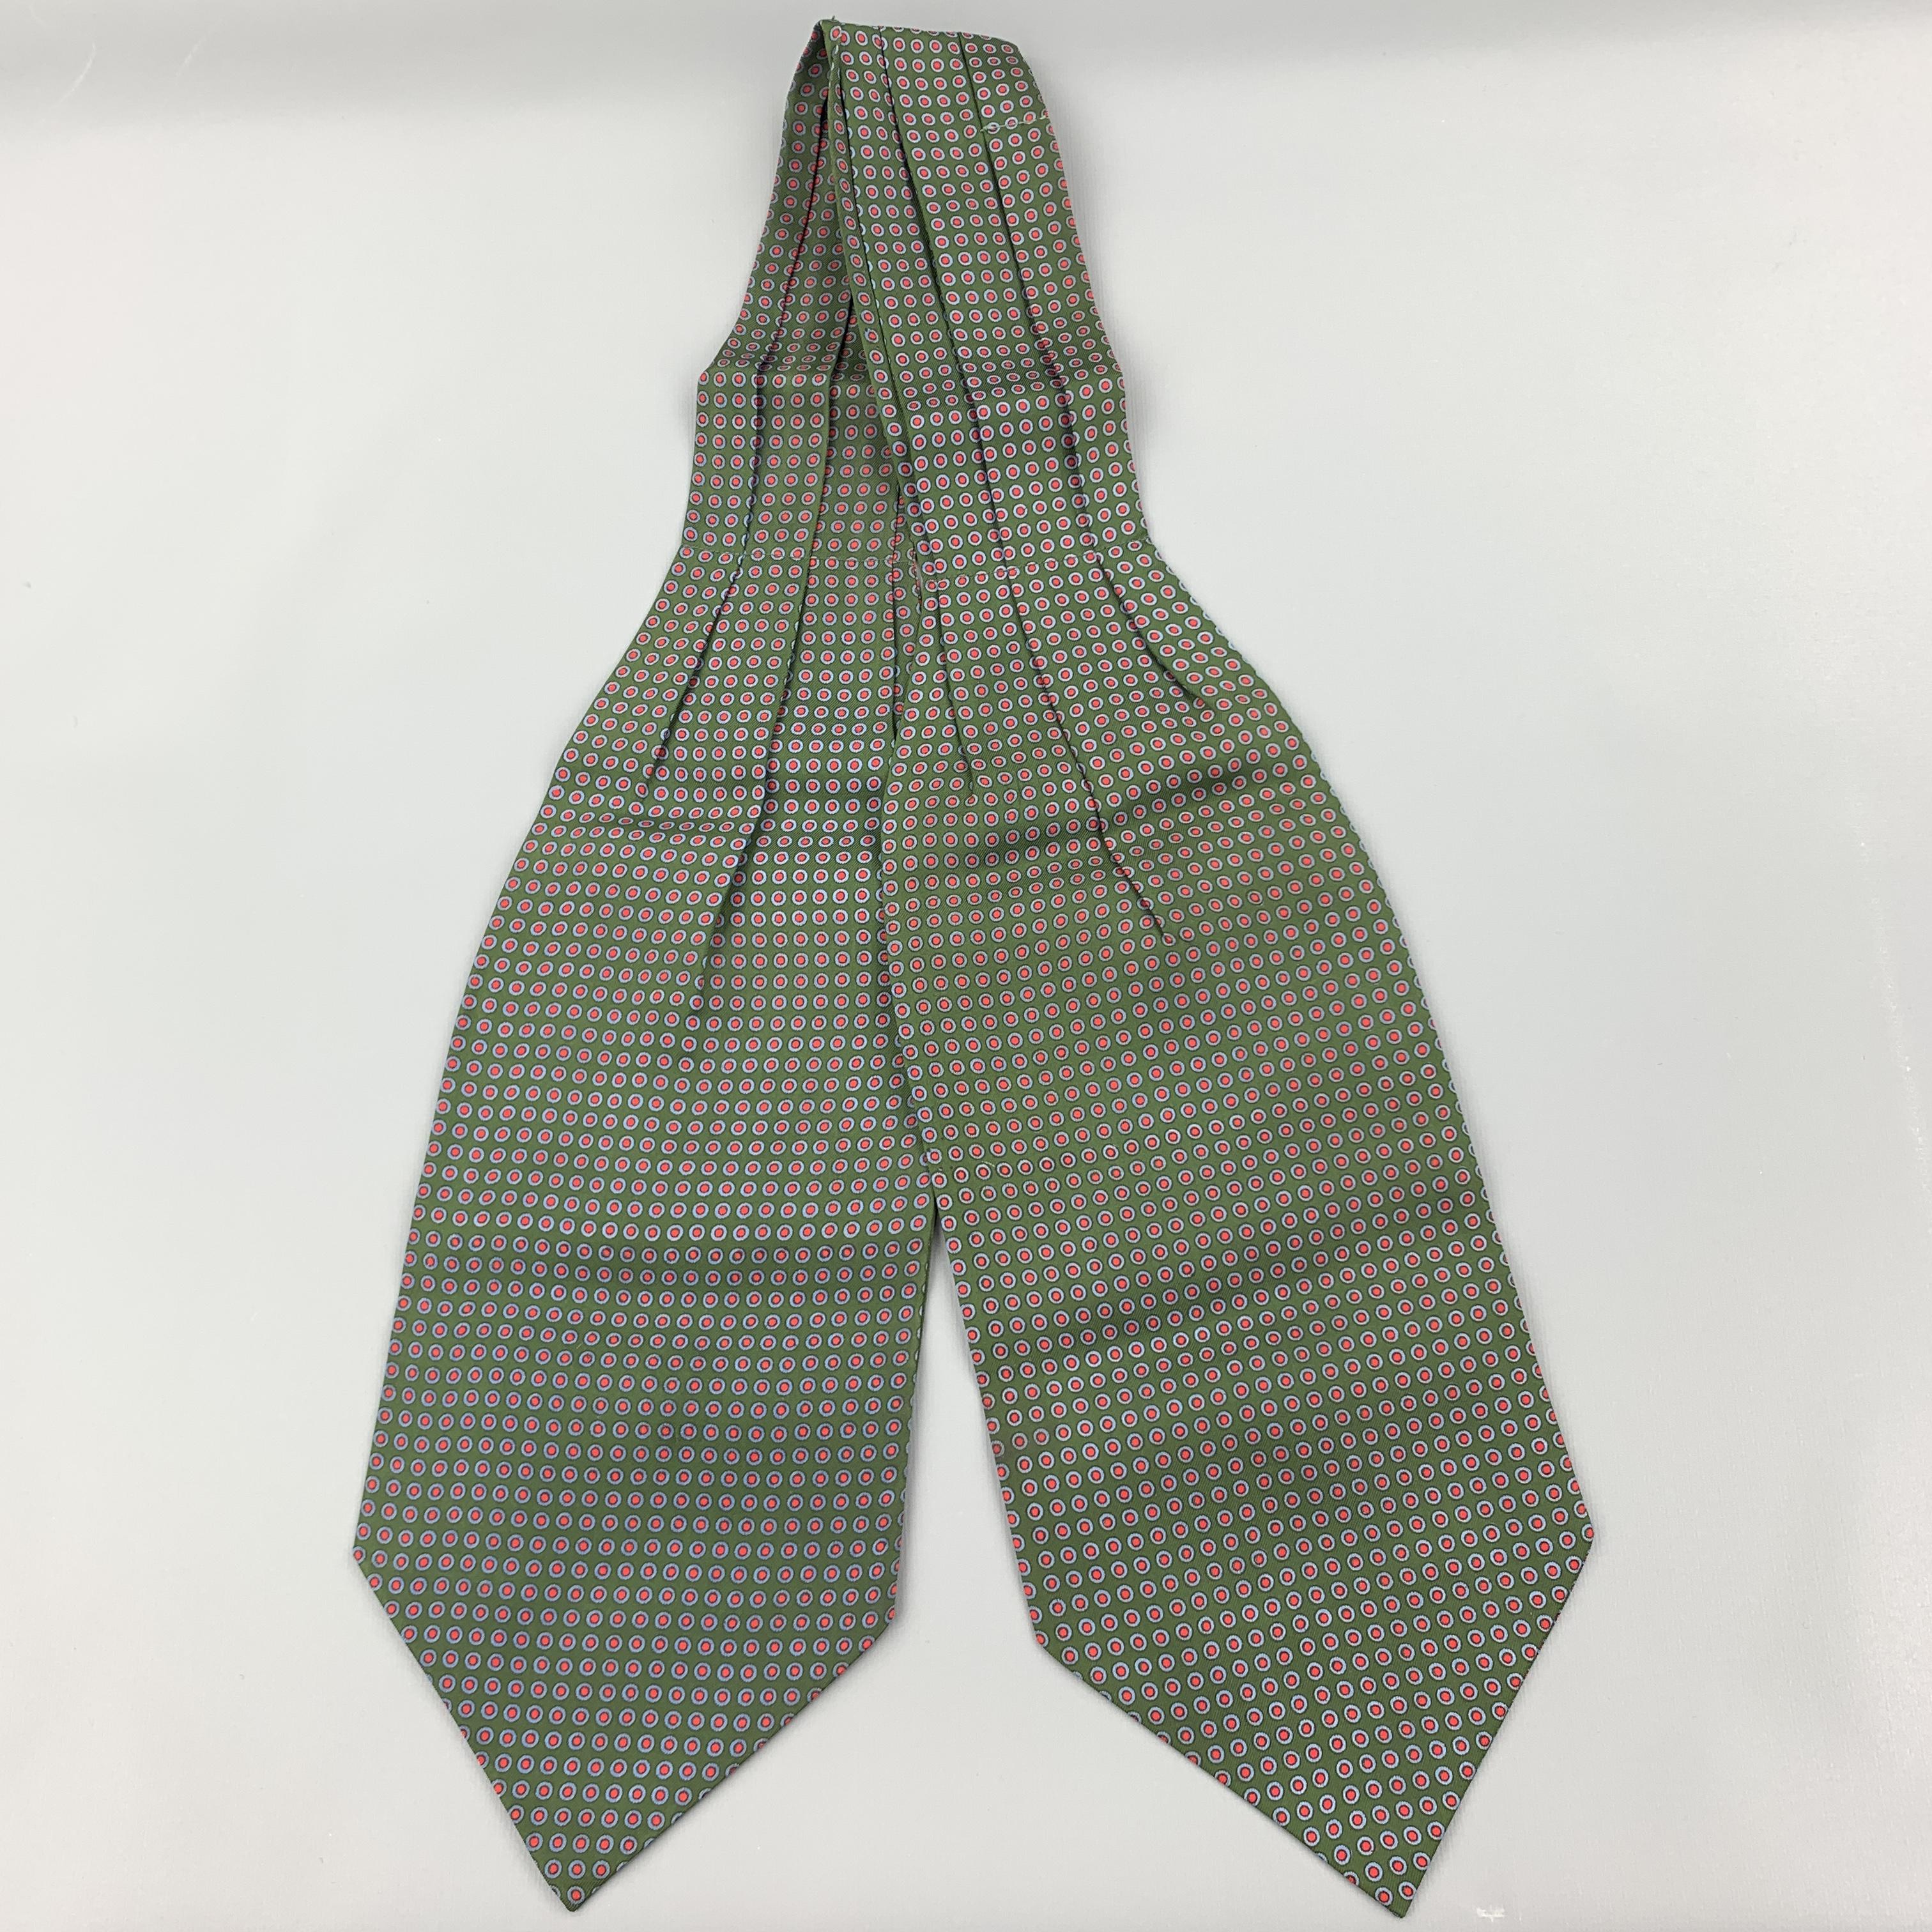 VINTAGE ABERCROMIE ascot comes in a olive circle print silk. Made in England. 
Excellent Pre-Owned Condition.

Measurements:

Shortest Width: 2.5 in. 
Longest Width: 5.5 in. 
Length: 44 in.